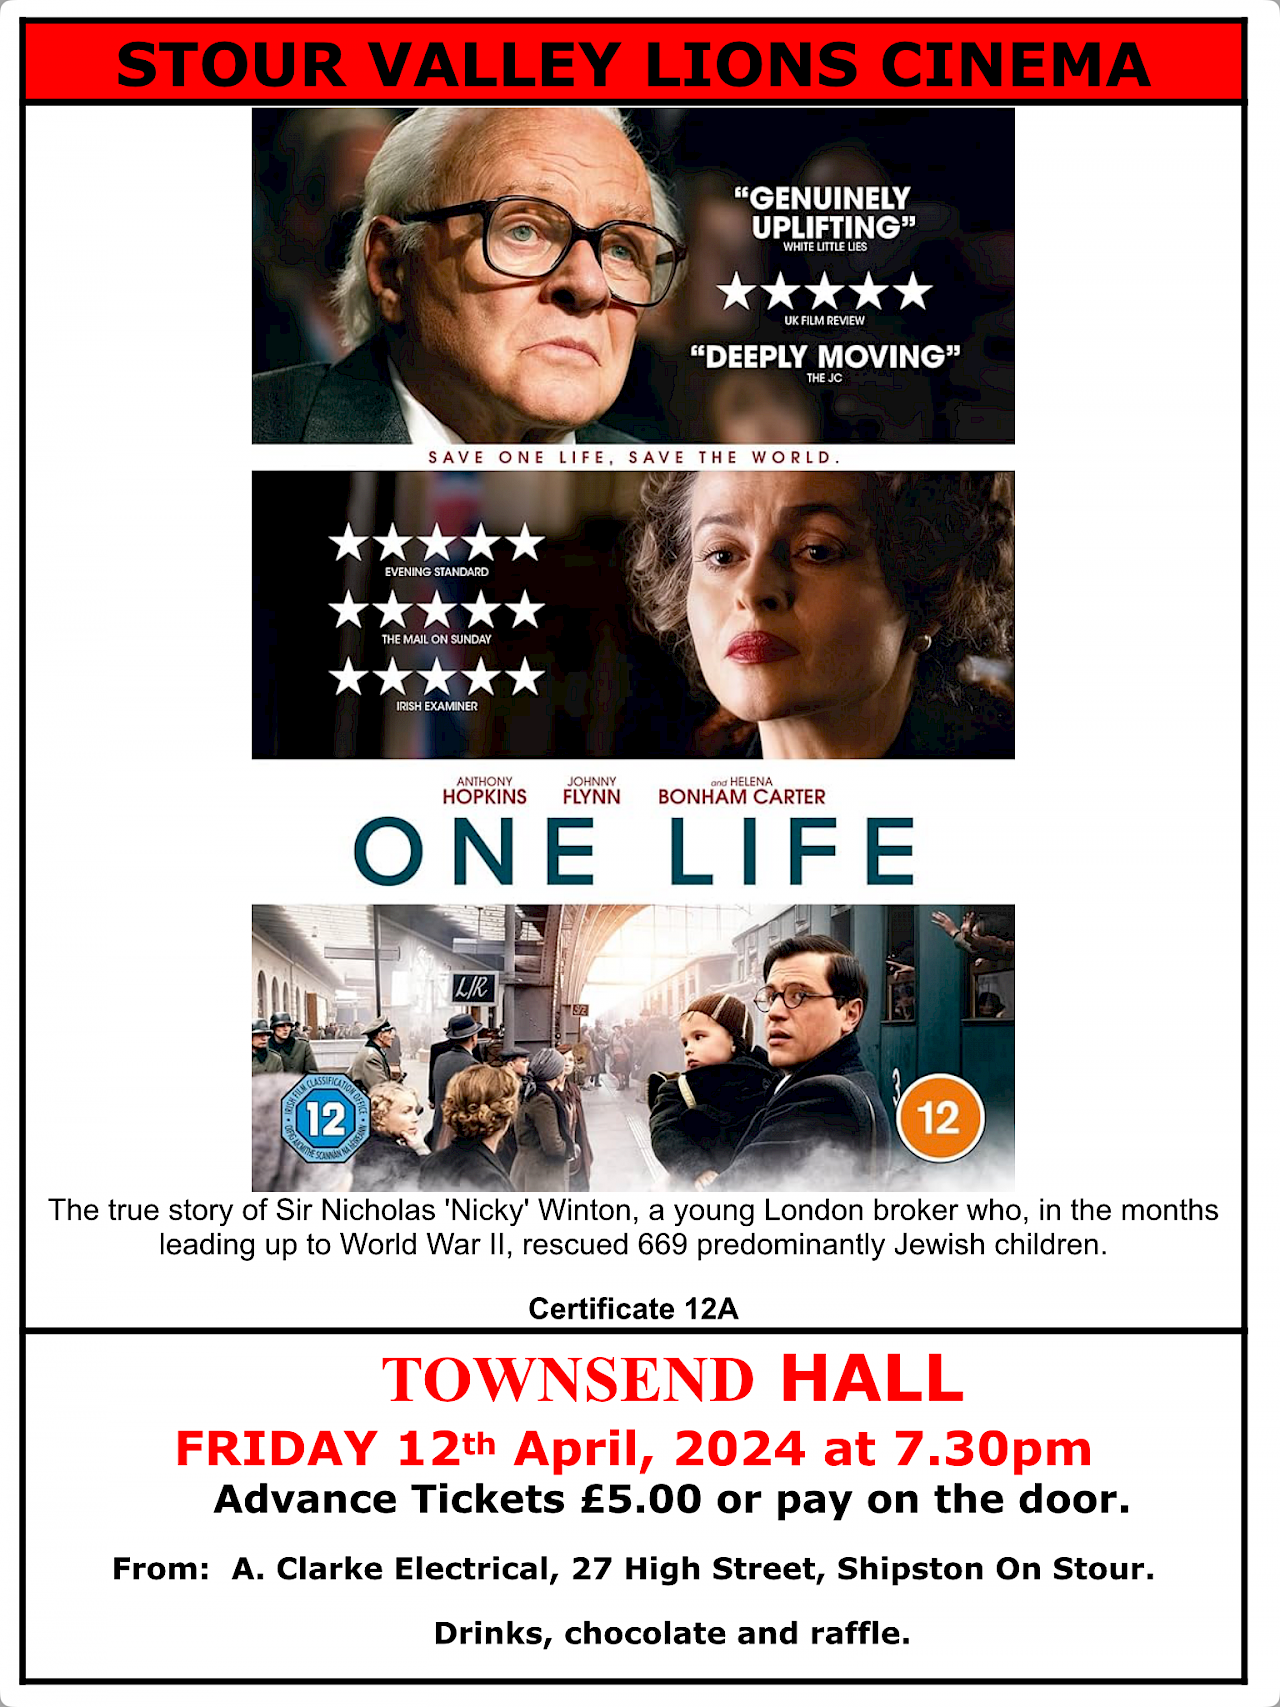 Stour Valley Lions Cinema Friday 12 April - One Life